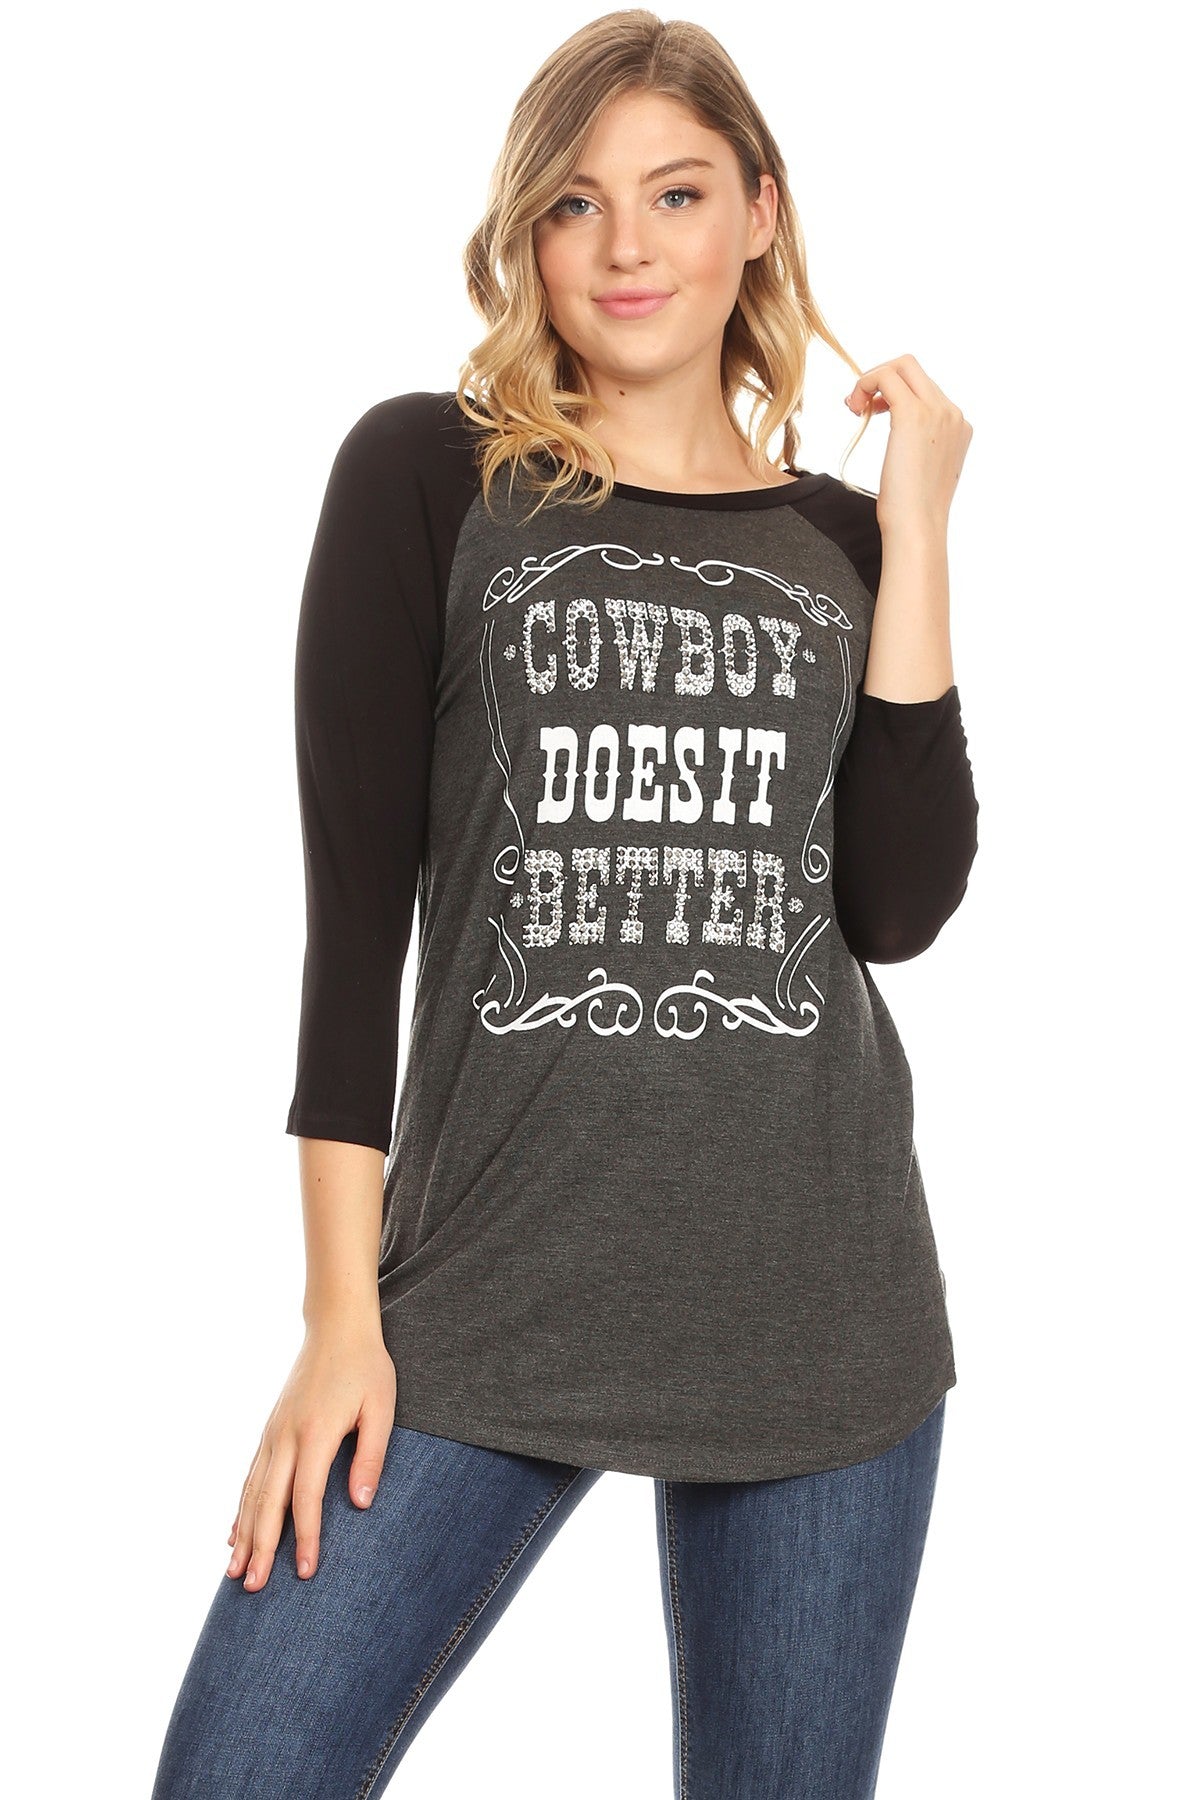 COWBOY DOES IT BETTER Women's  Western Top Fitted 3/4 sleeve tee with a round neck and rhinestone detail